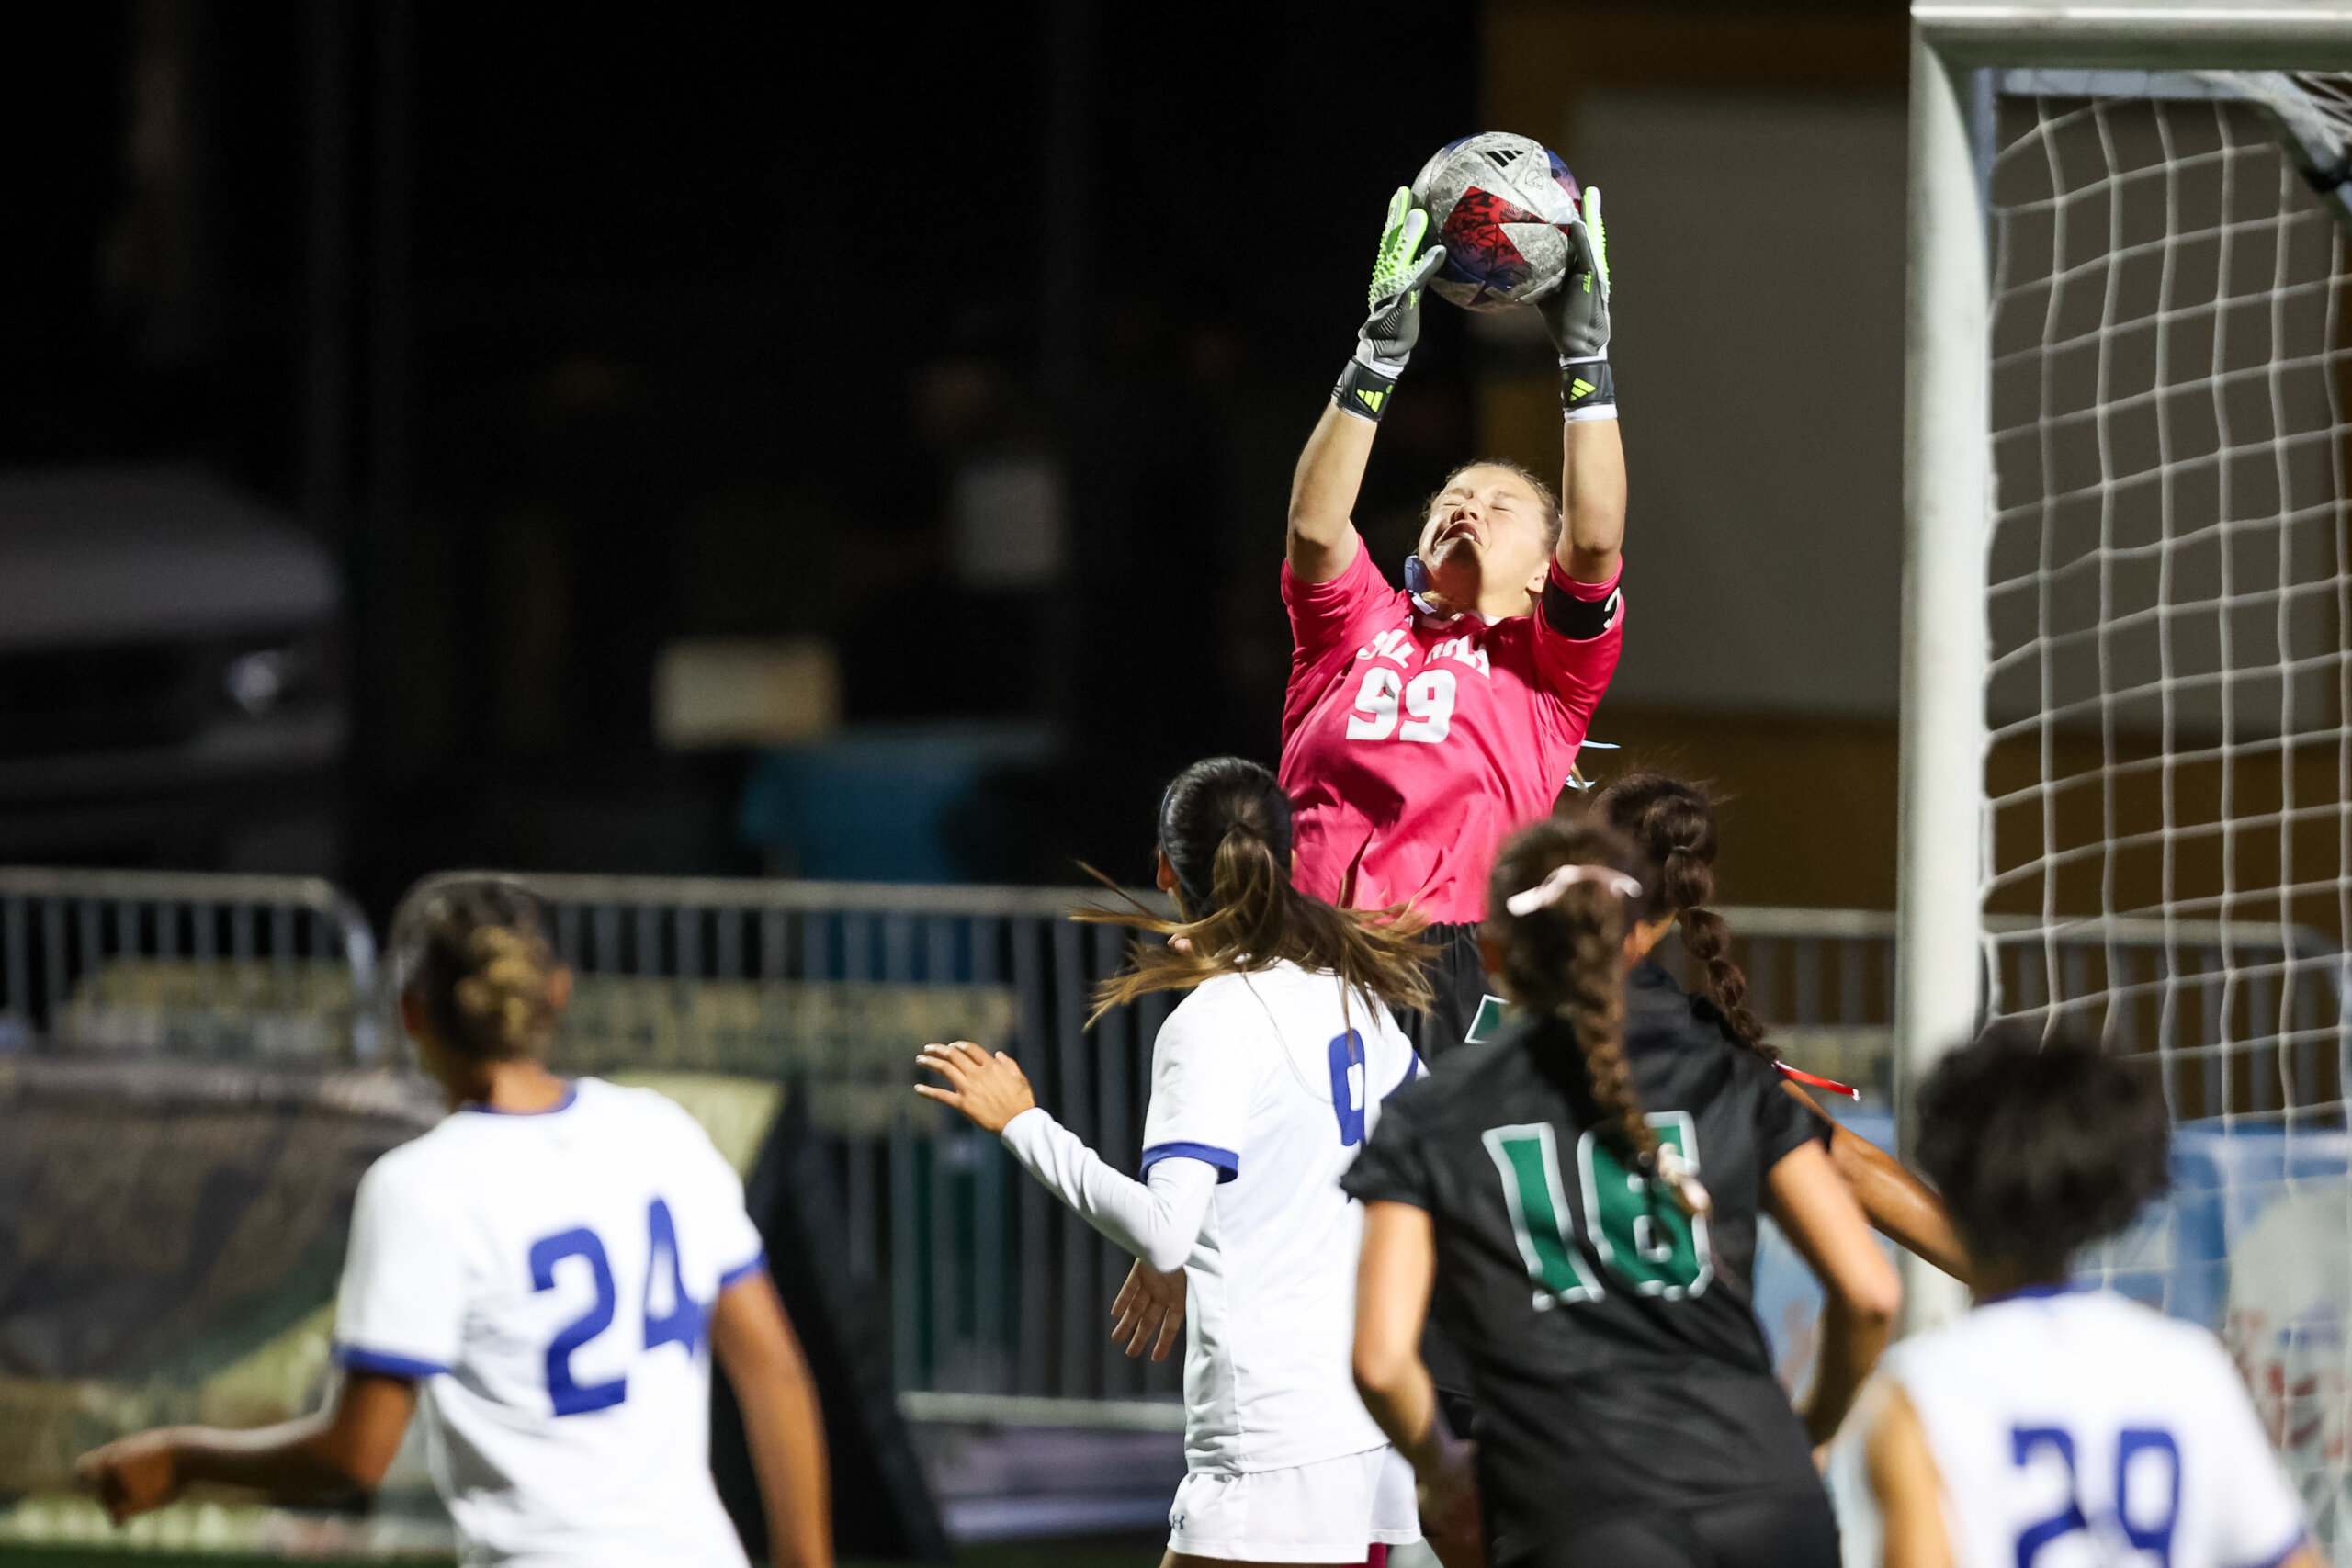 Mac Samuel makes a flying save during a soccer match at Cal Poly